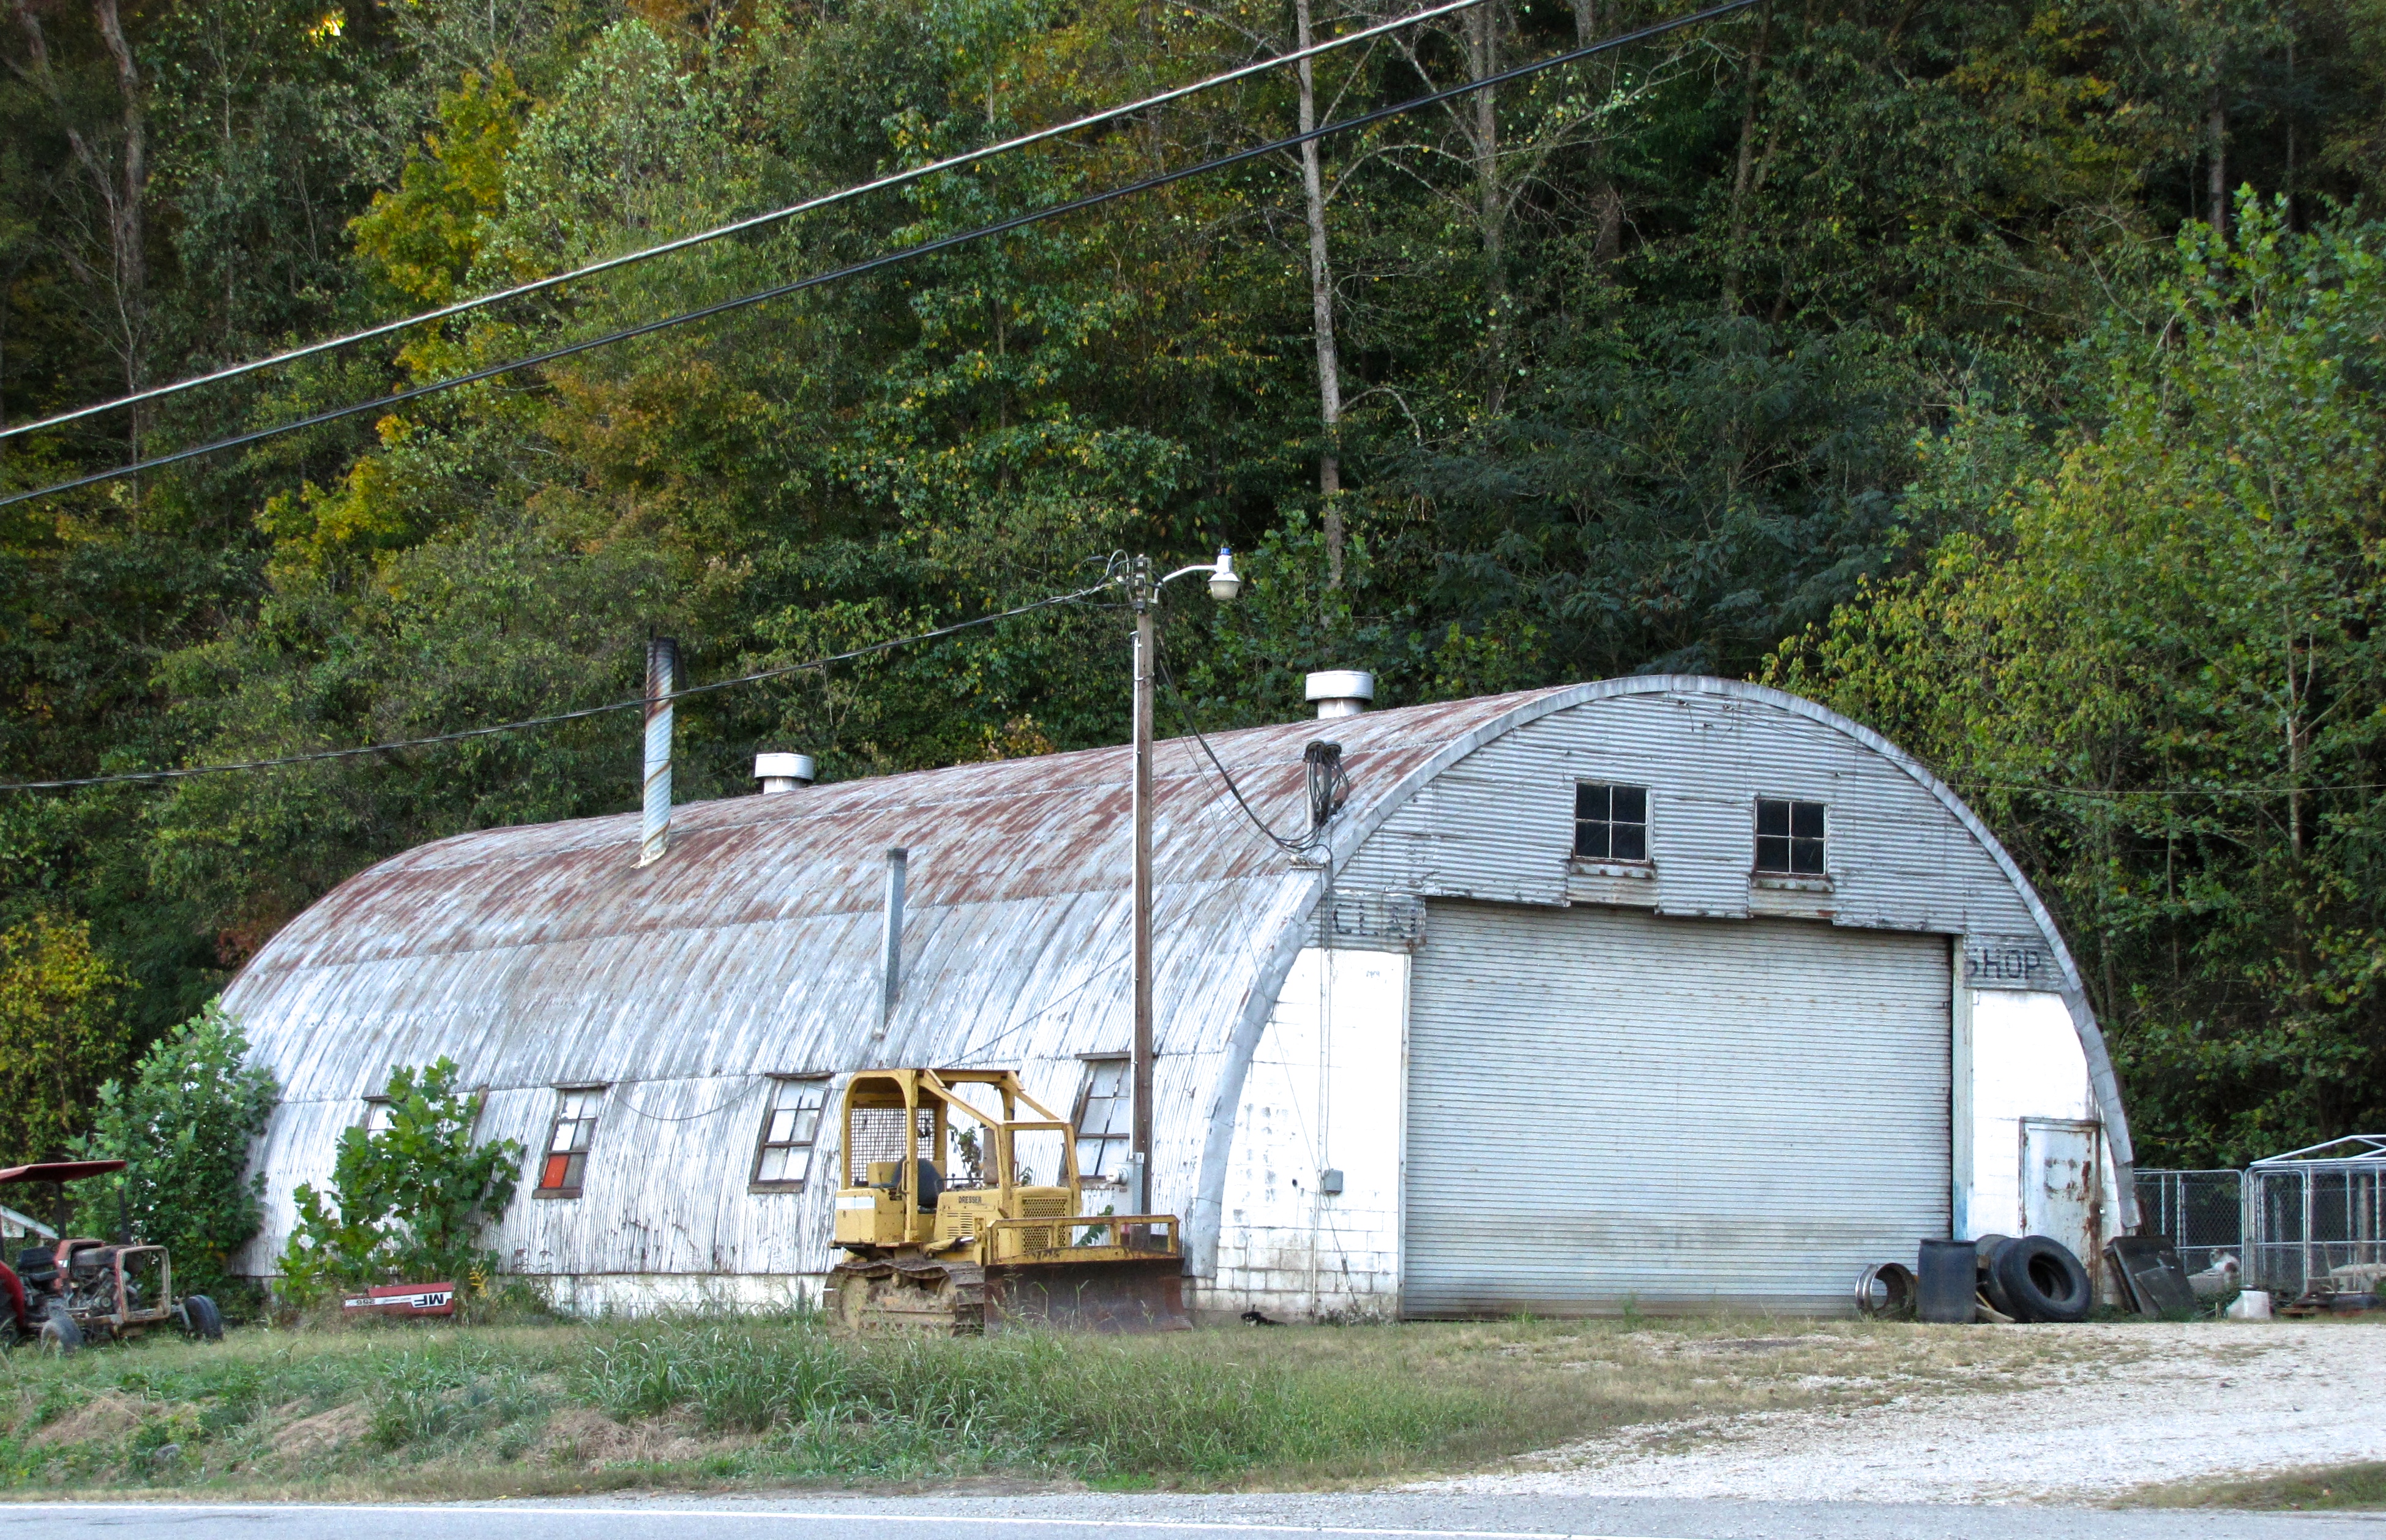 quonset hut in Potomac, MD